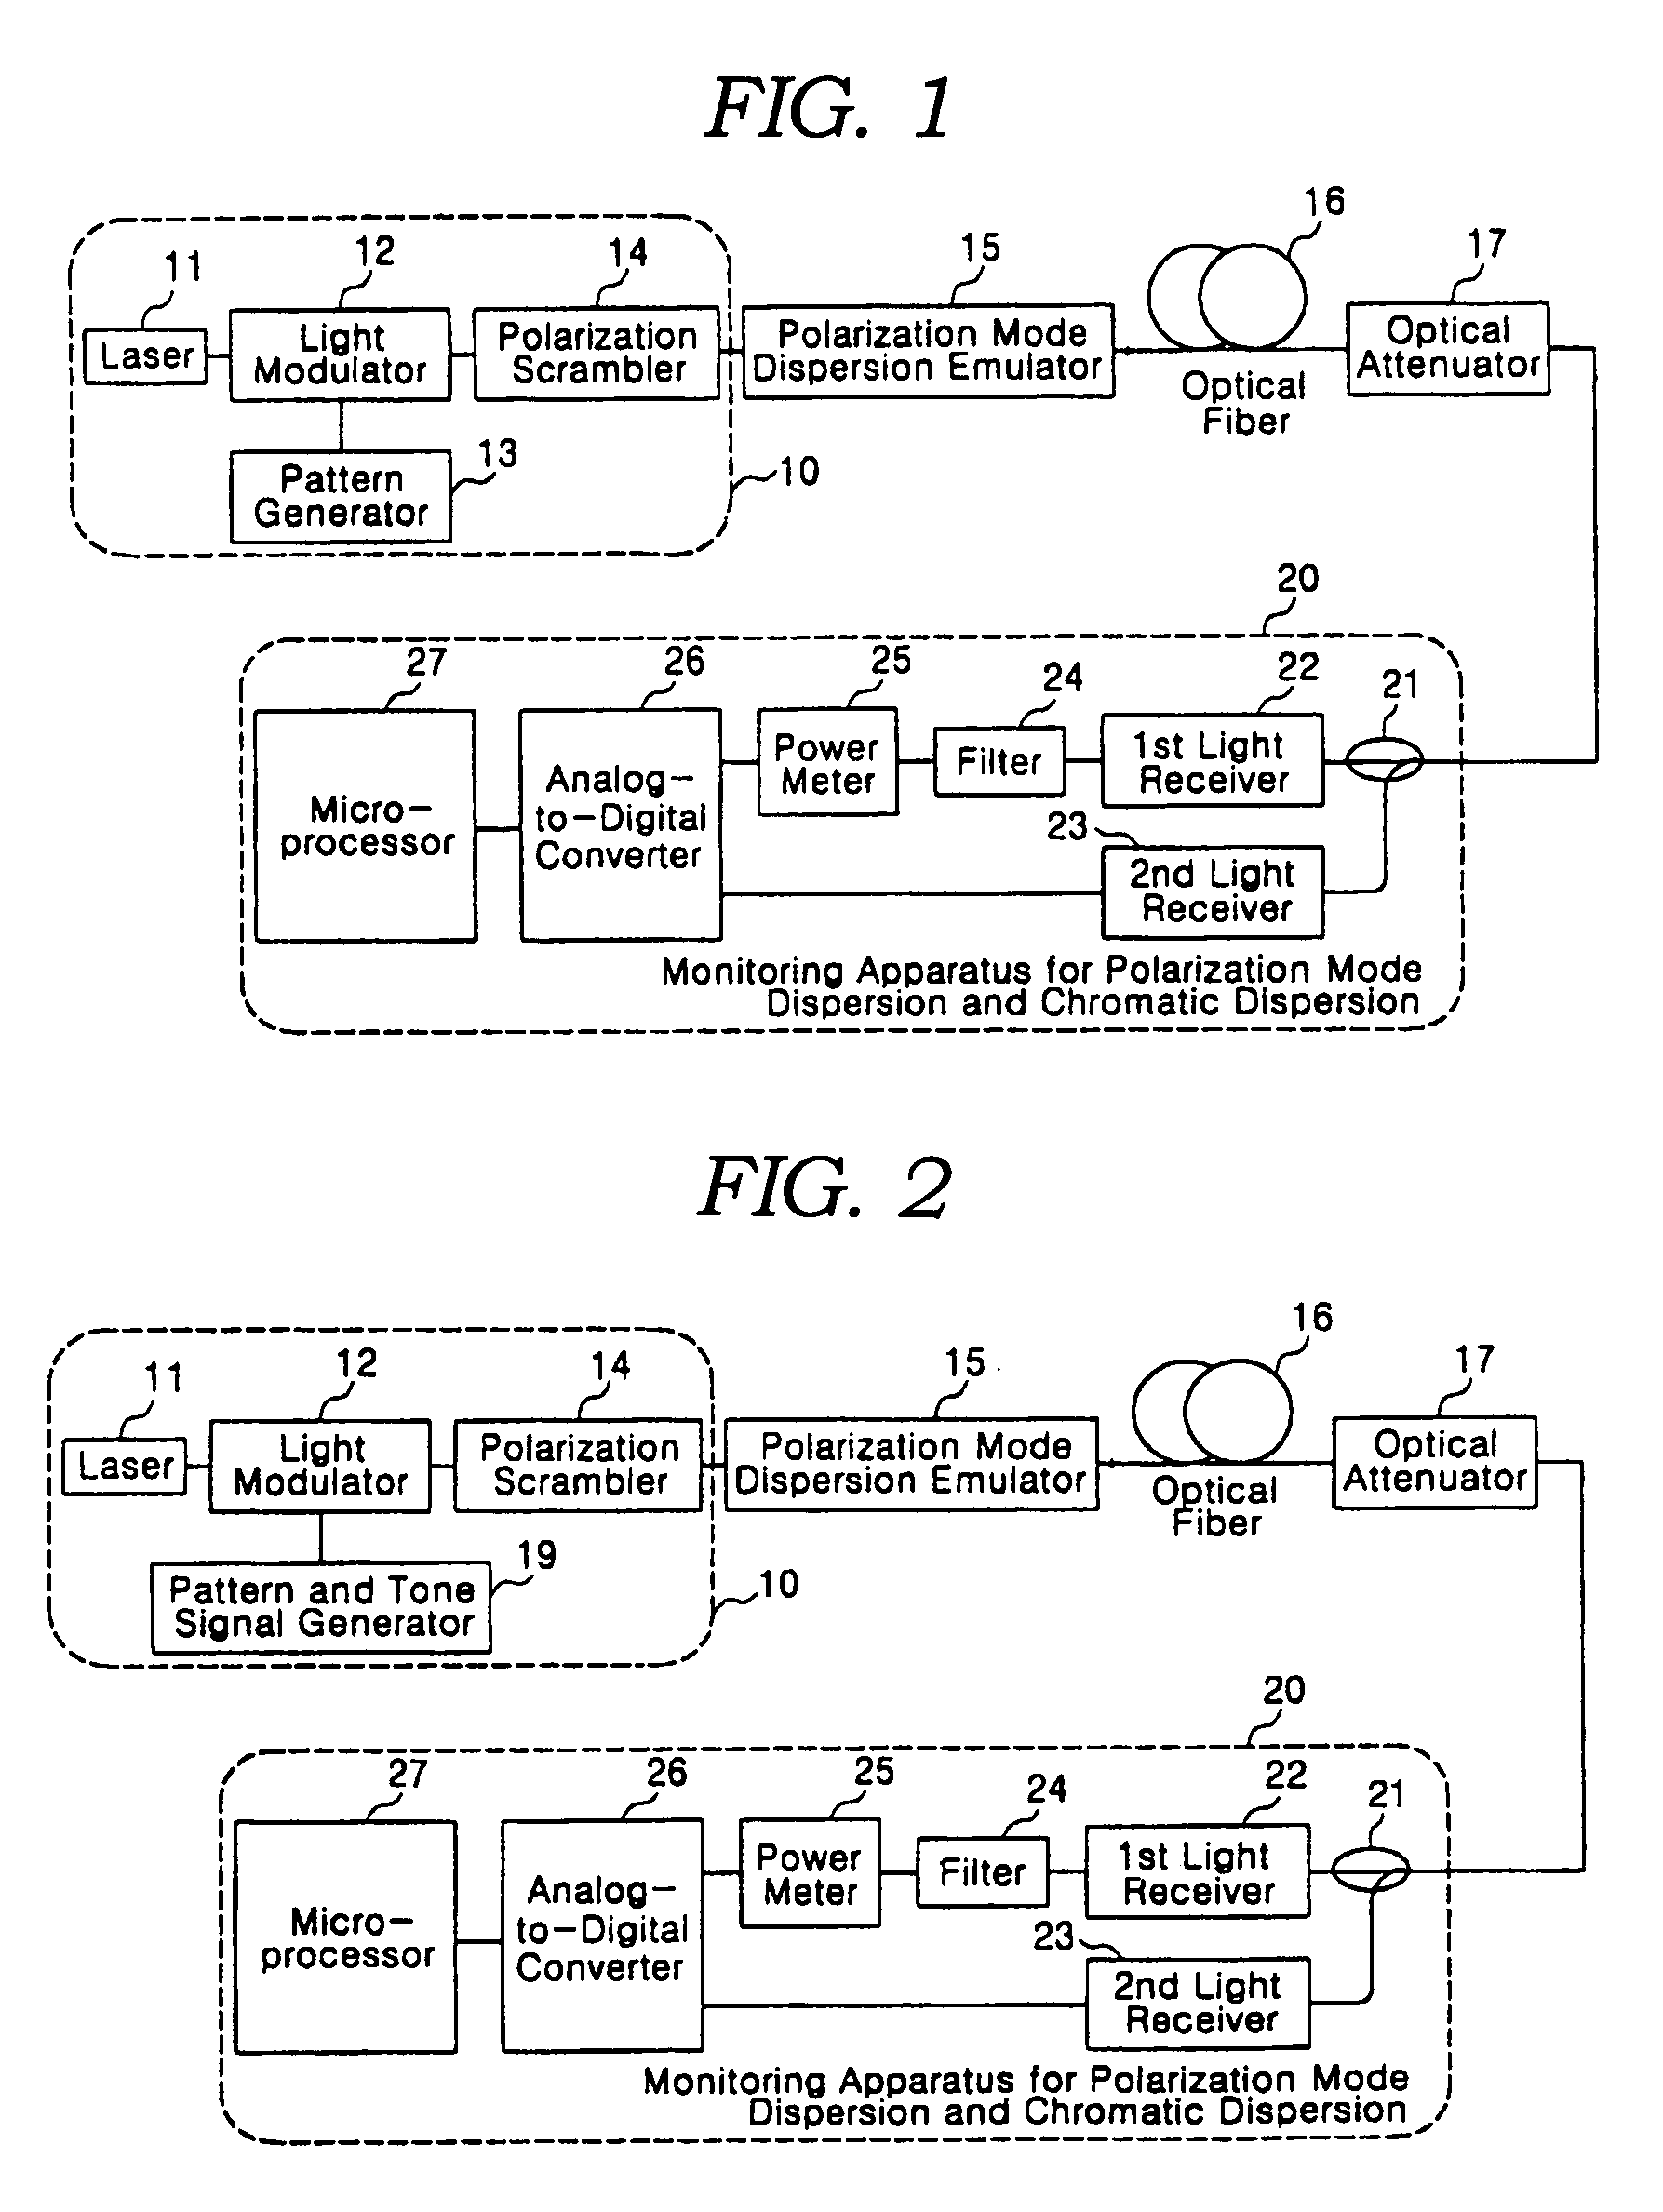 Apparatus for monitoring polarization-mode dispersion and chromatic dispersion and transmitting means for transmitting optical signal in optical network